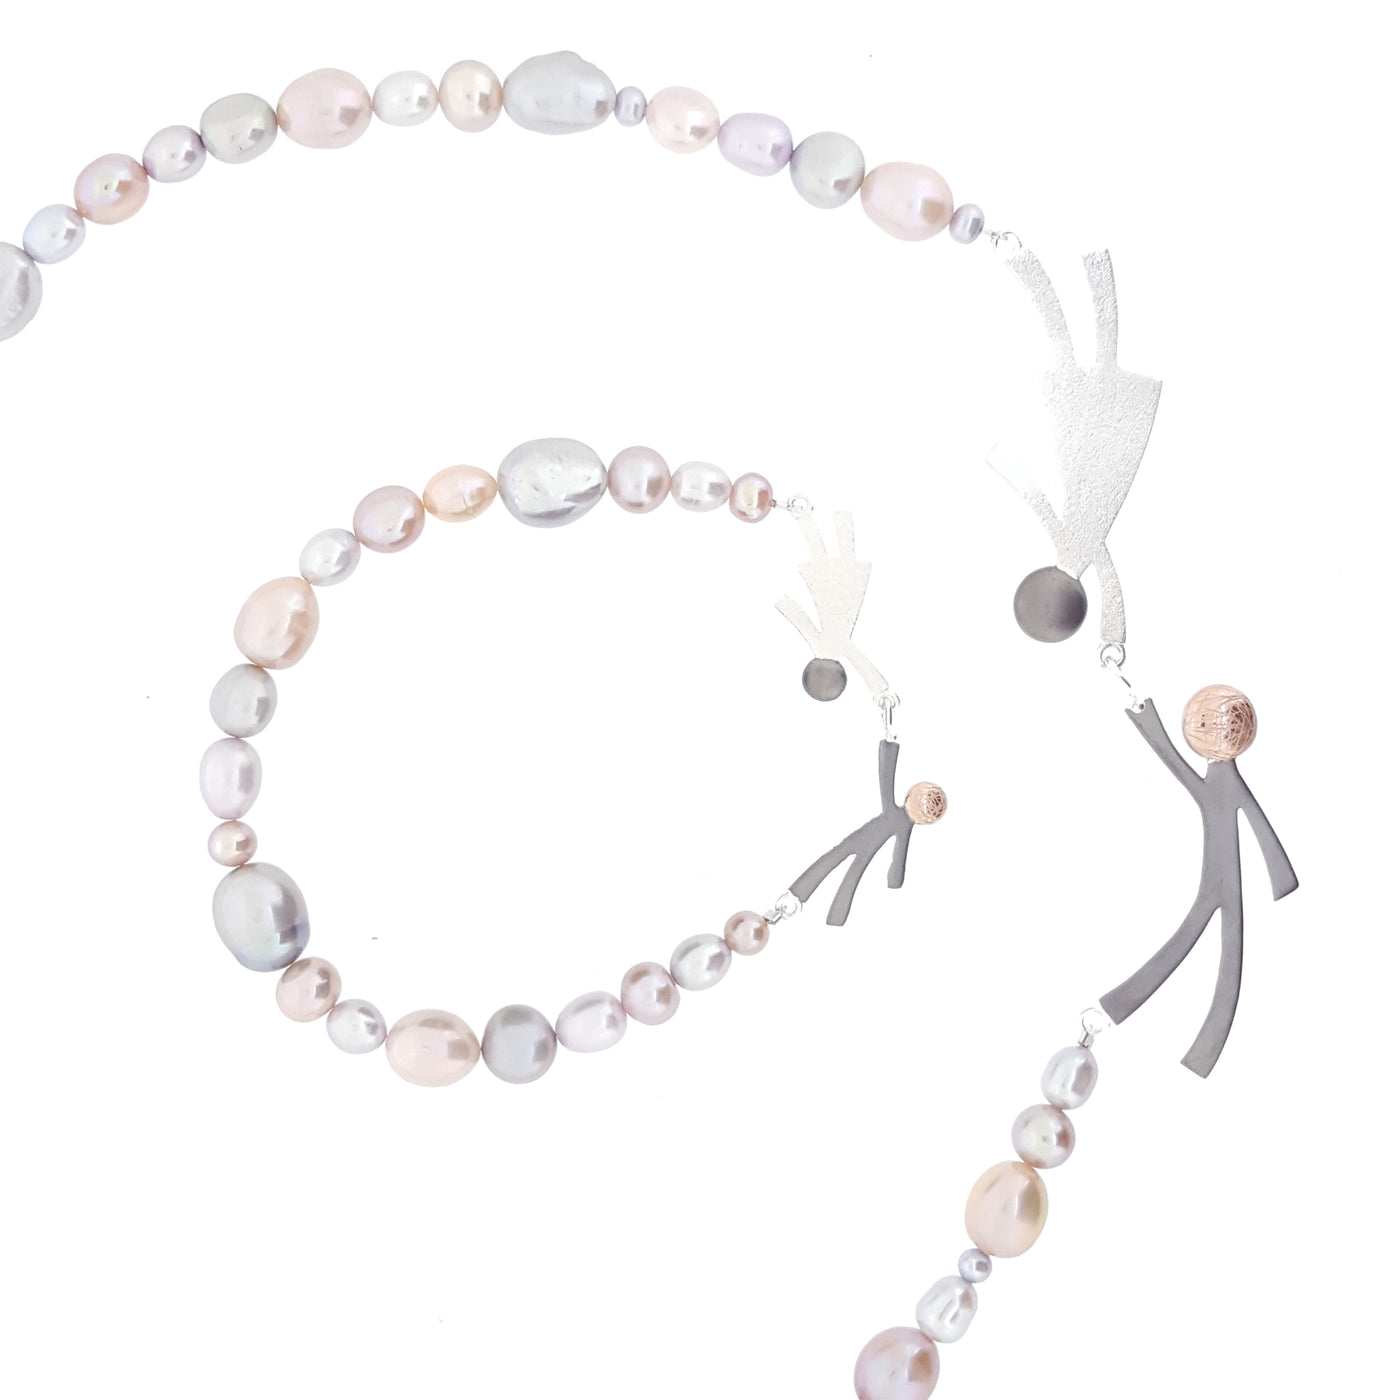 Ruby & Oliver Necklace 'Pastel Fullstrand' - The Courthouse Collection